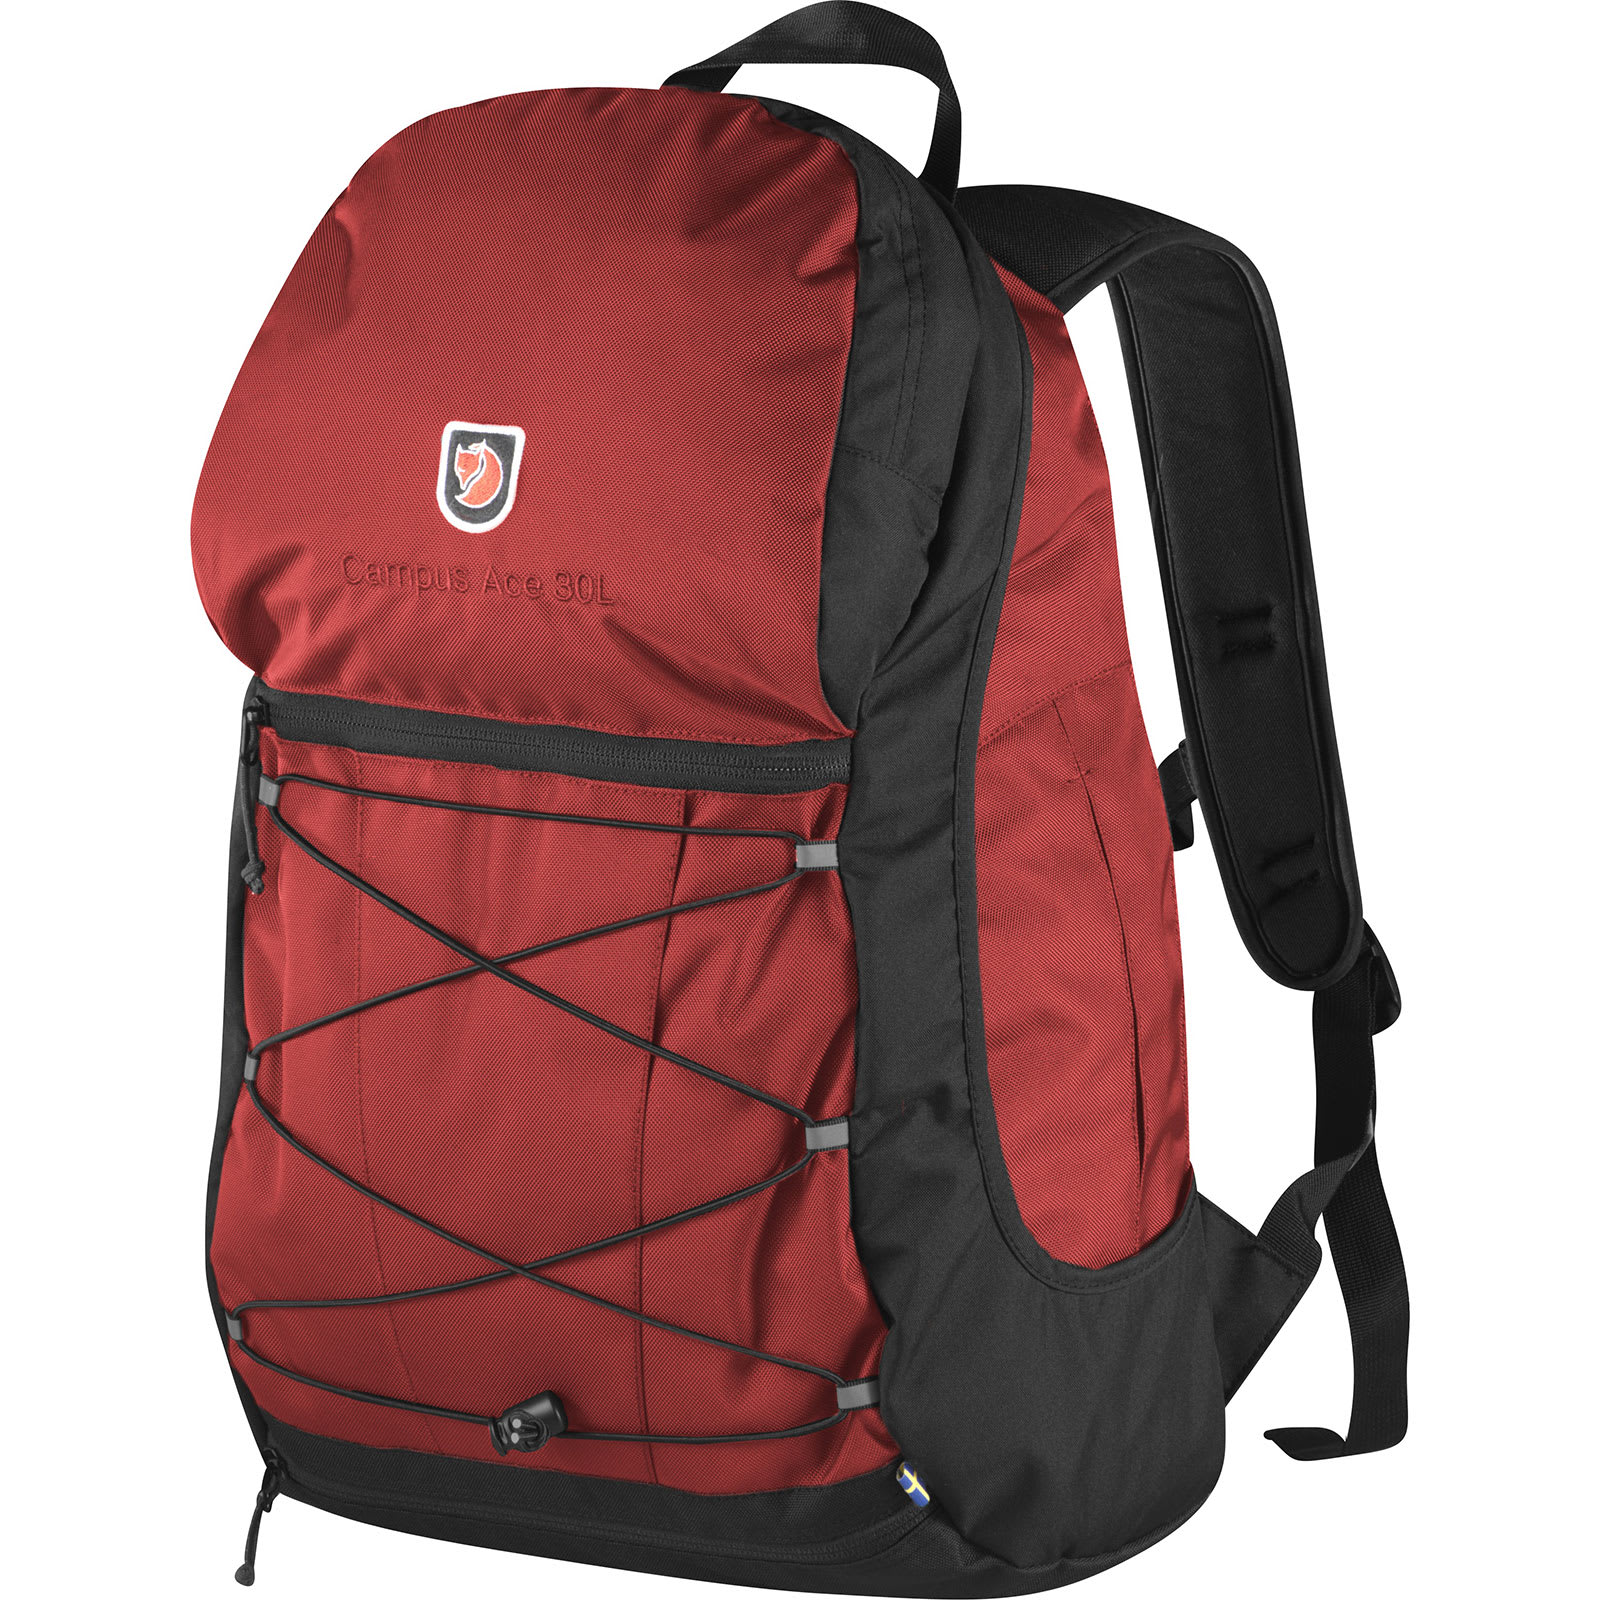 accurately Disorder Partina City Buy Fjällräven Campus Ace 30L from Outnorth